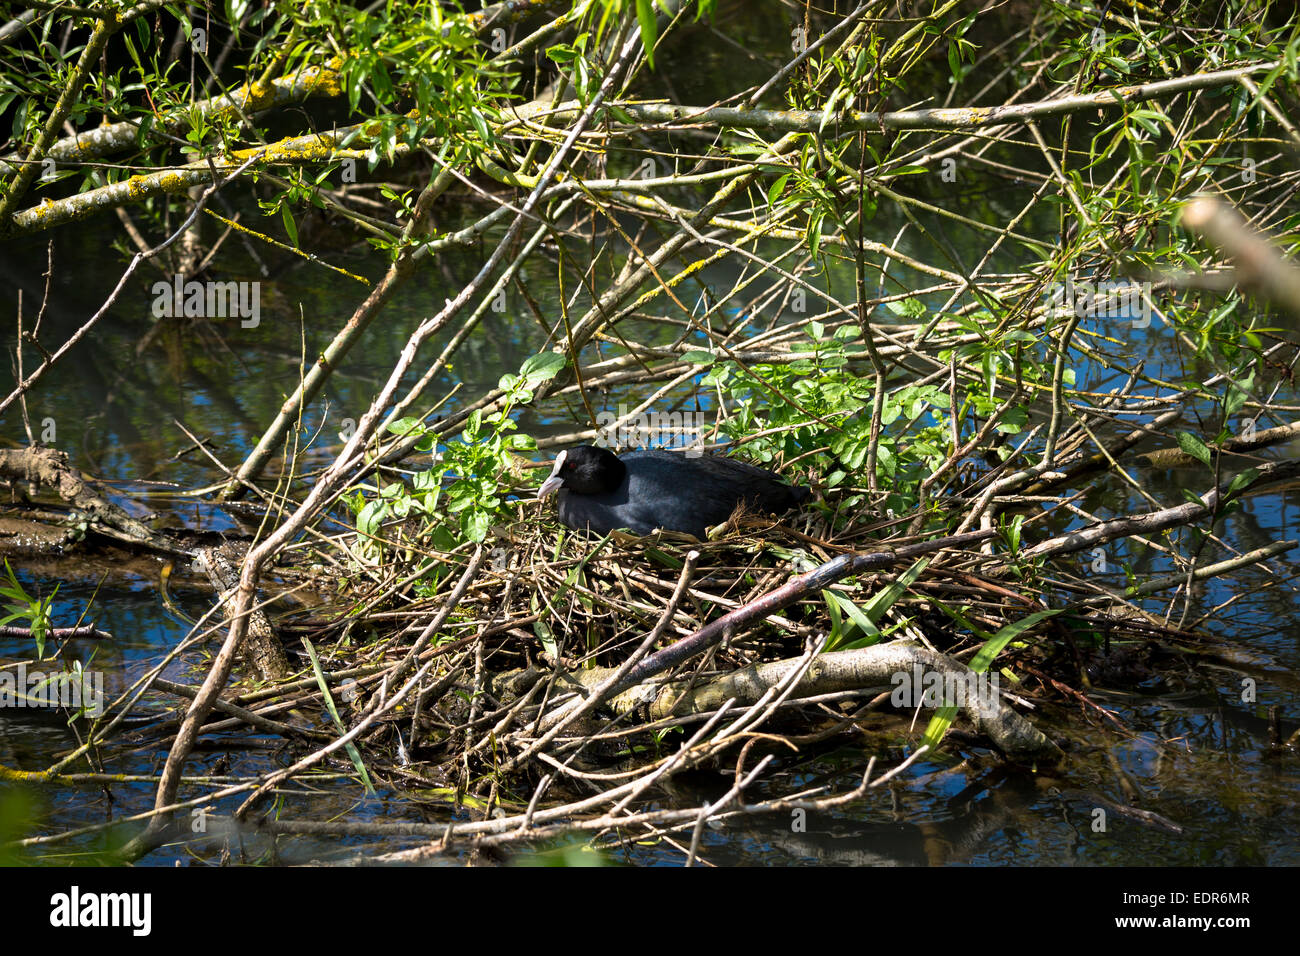 Adult female Coot, Fulica atra, in the Rallidae rails bird family sitting on her nest in summertime, UK Stock Photo